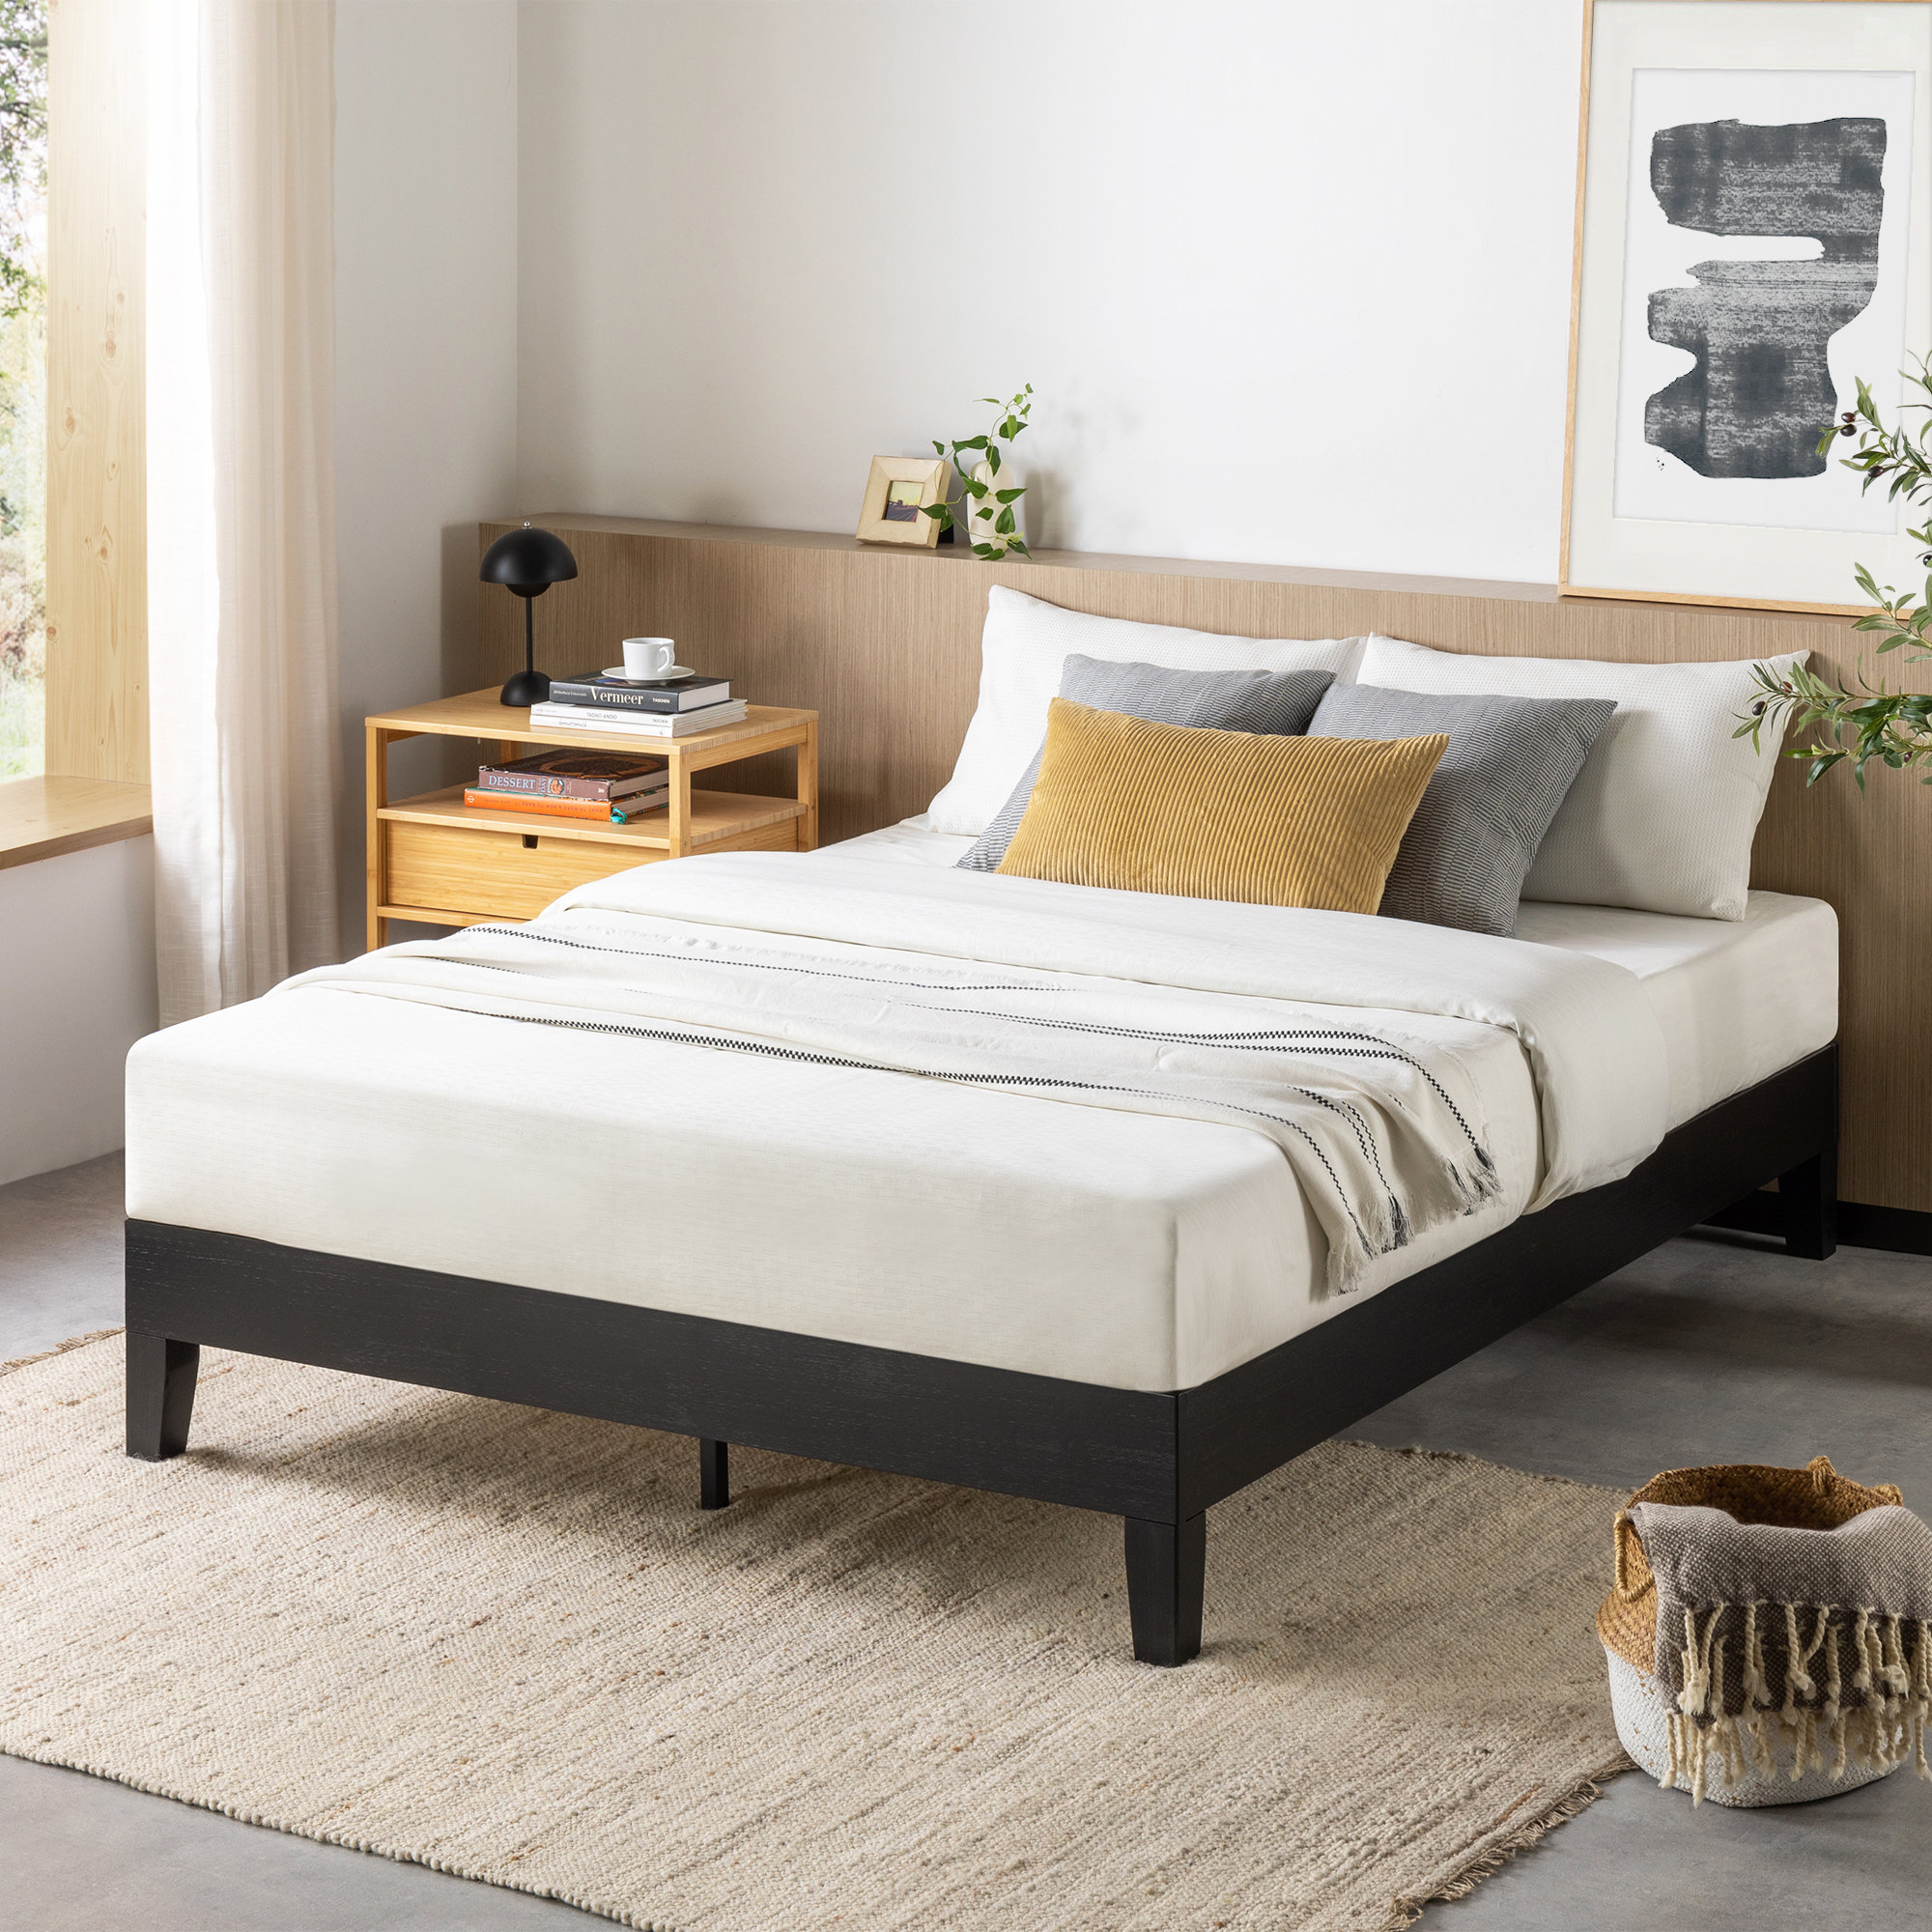 Buy solid sheesham wood bed online with storage in platform design -  Furniture Online: Buy Wooden Furniture for Every Home